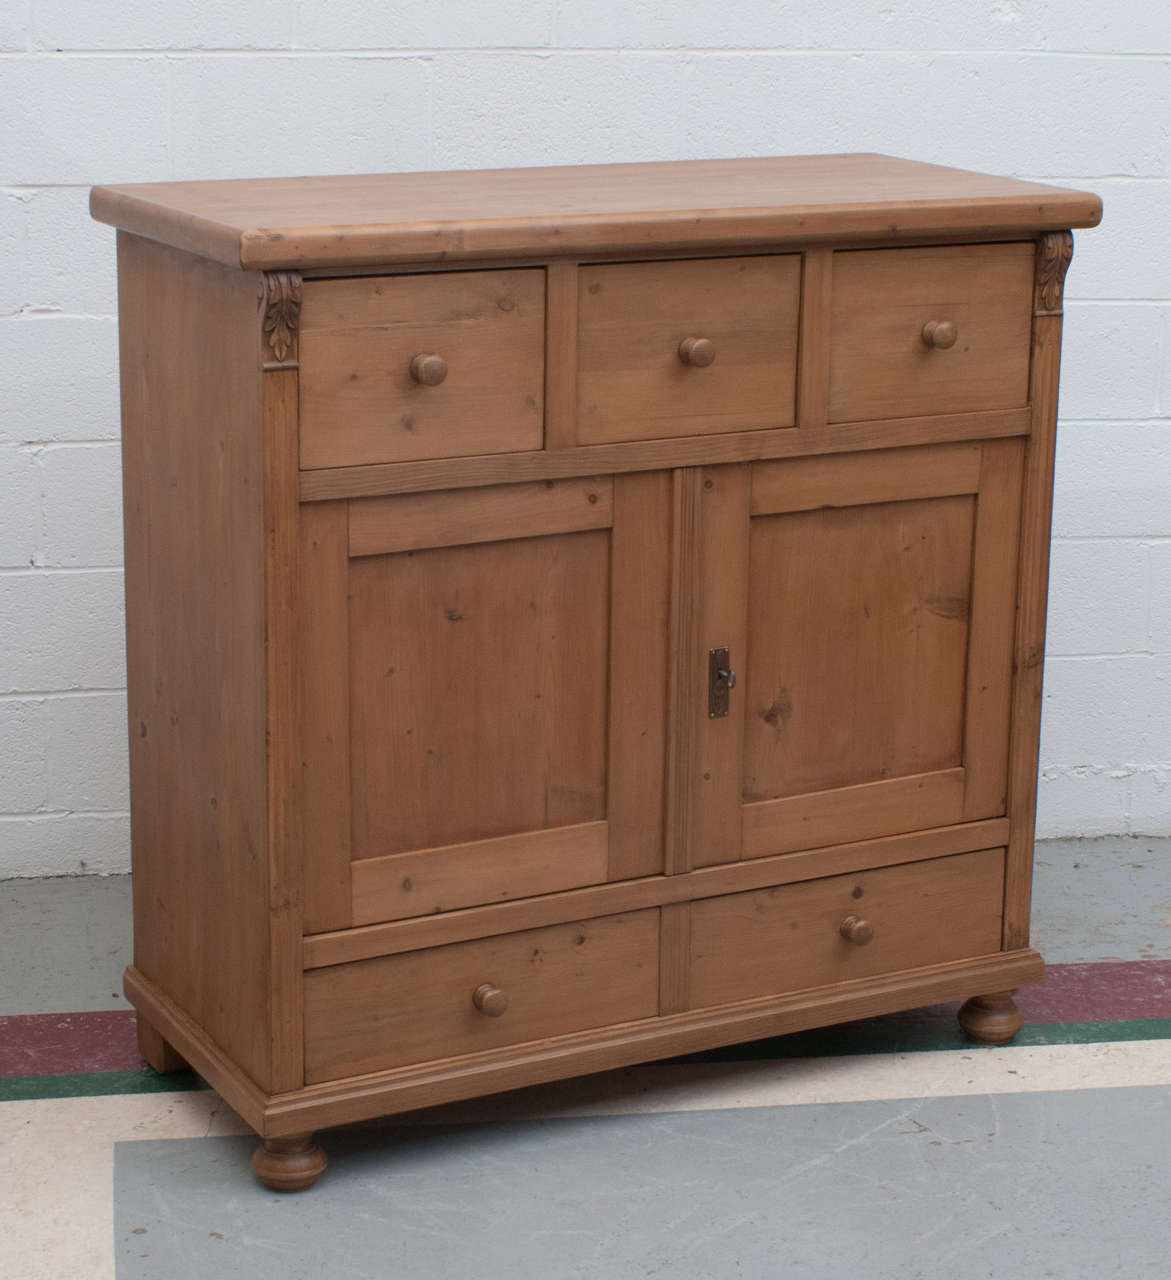 A substantial and well proportioned pine side cupboard featuring five spacious dovetailed drawers, the upper three replacements, and two panelled doors opening to a single central shelf.